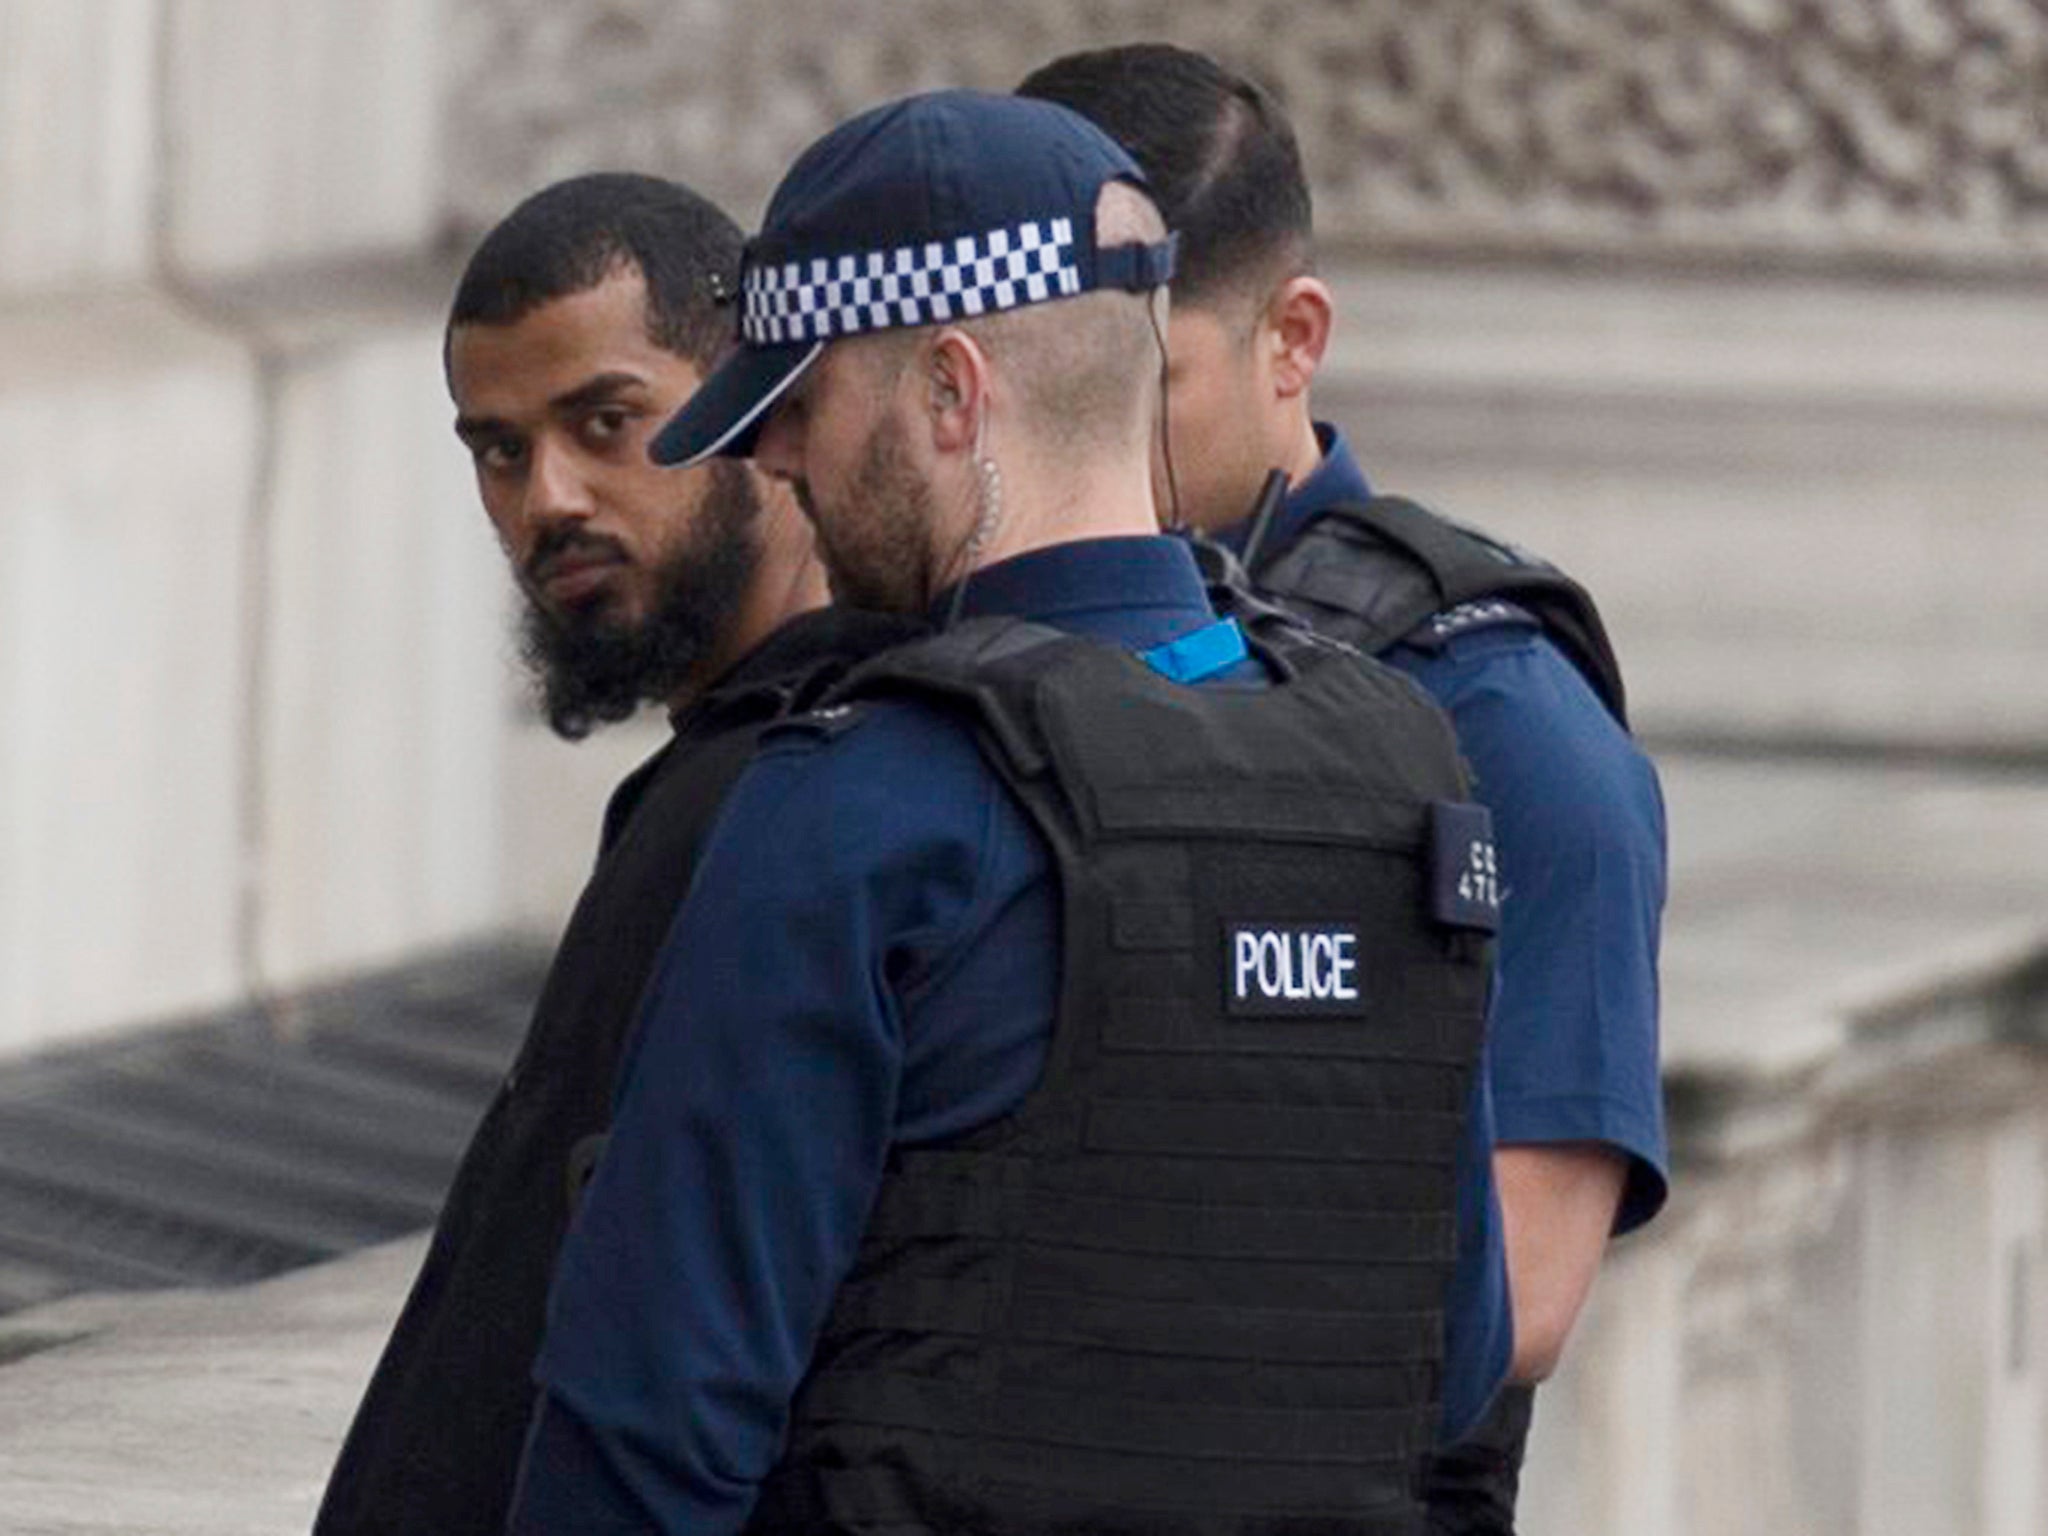 Taliban bombmaker who attempted Westminster knife attack jailed for life